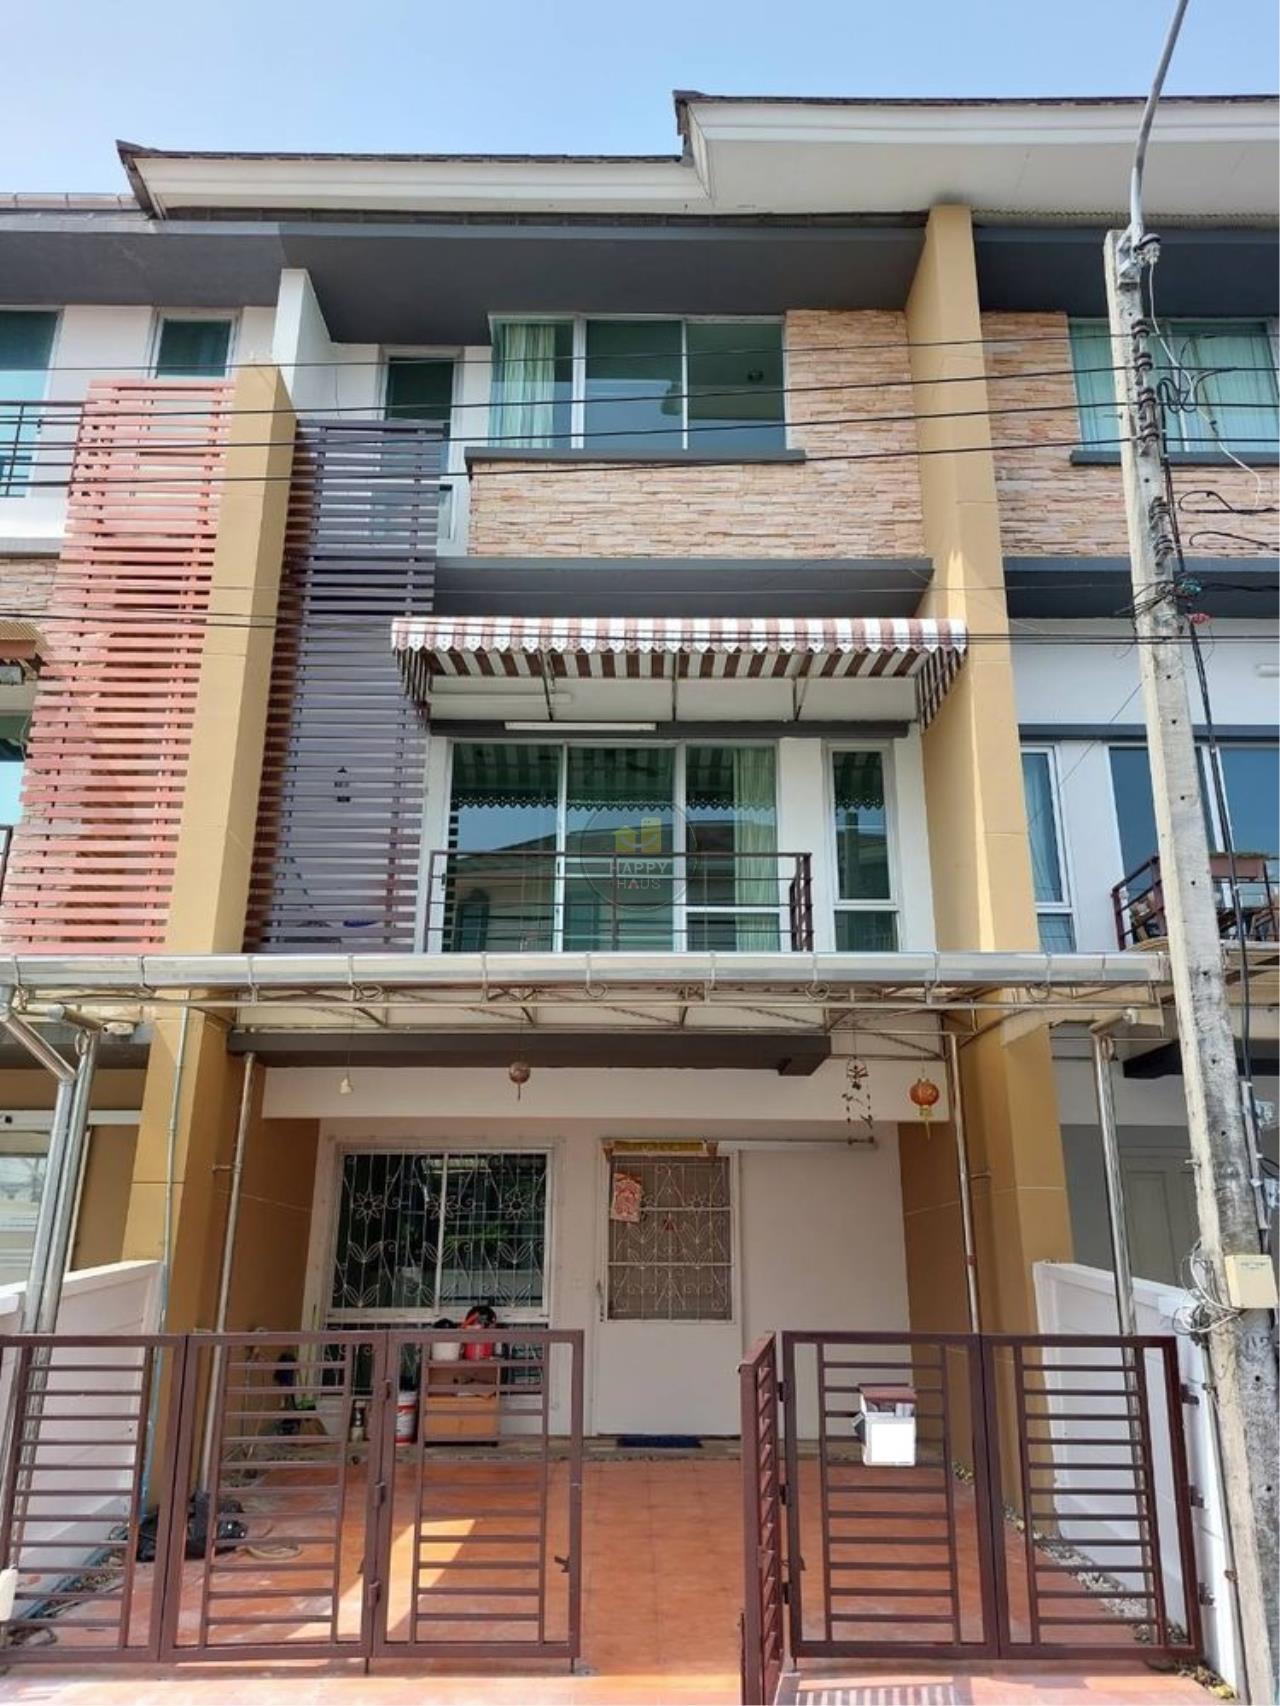 H854HH-For Sale Townhome 3 floors empty house Plus City Park Srinakarin Suan Luang Close to shopping centers and markets